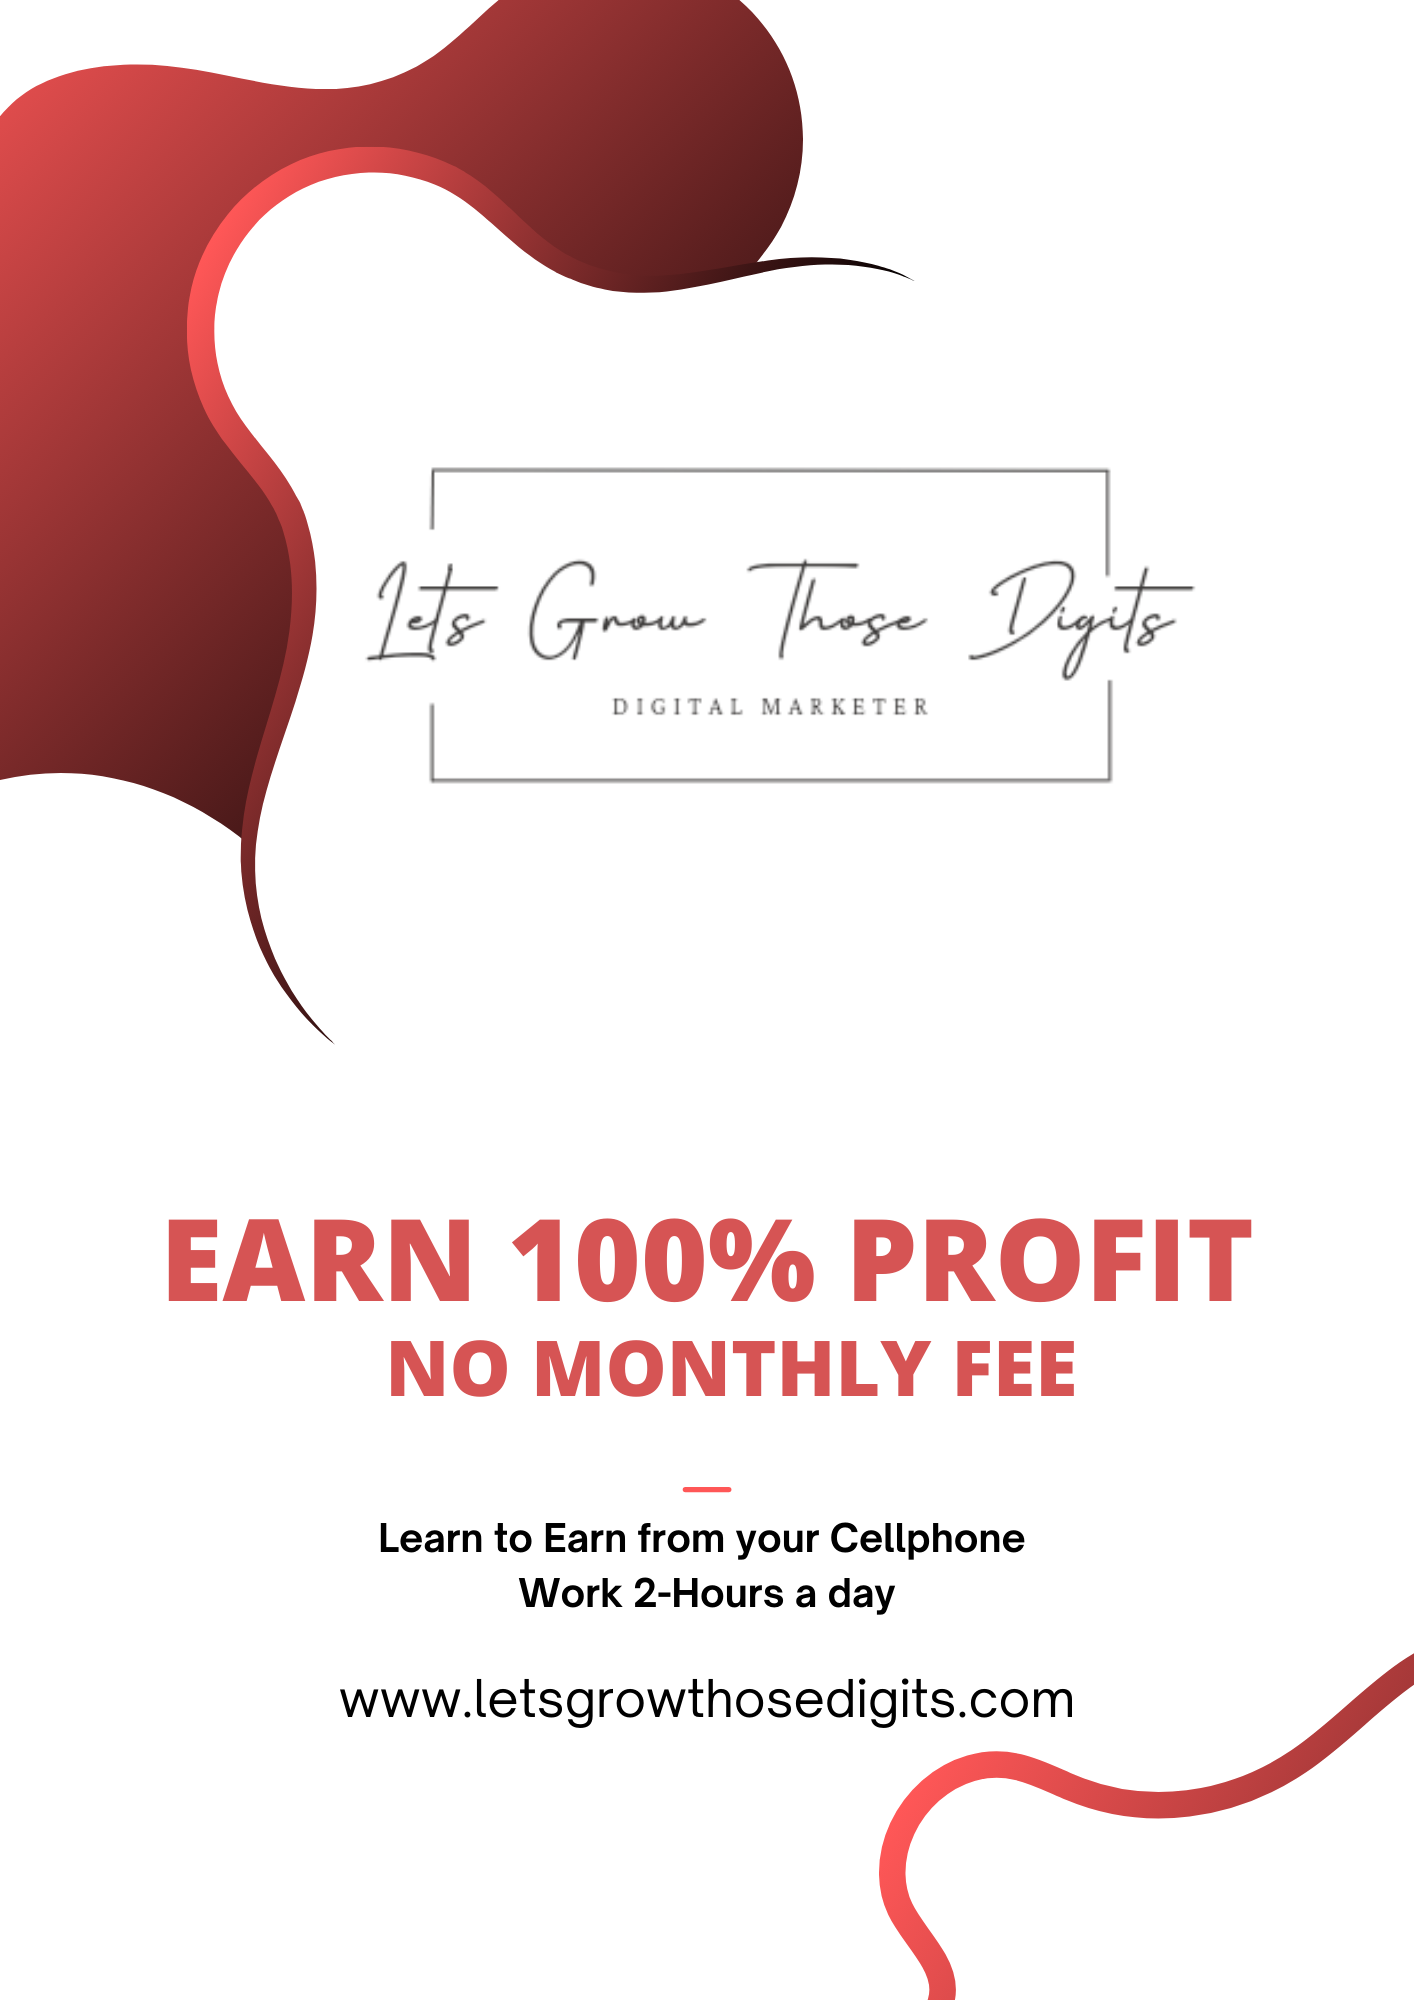 Start your $100 daily pay today... Work for just 2 hours a day! - Houston Sales, Marketing